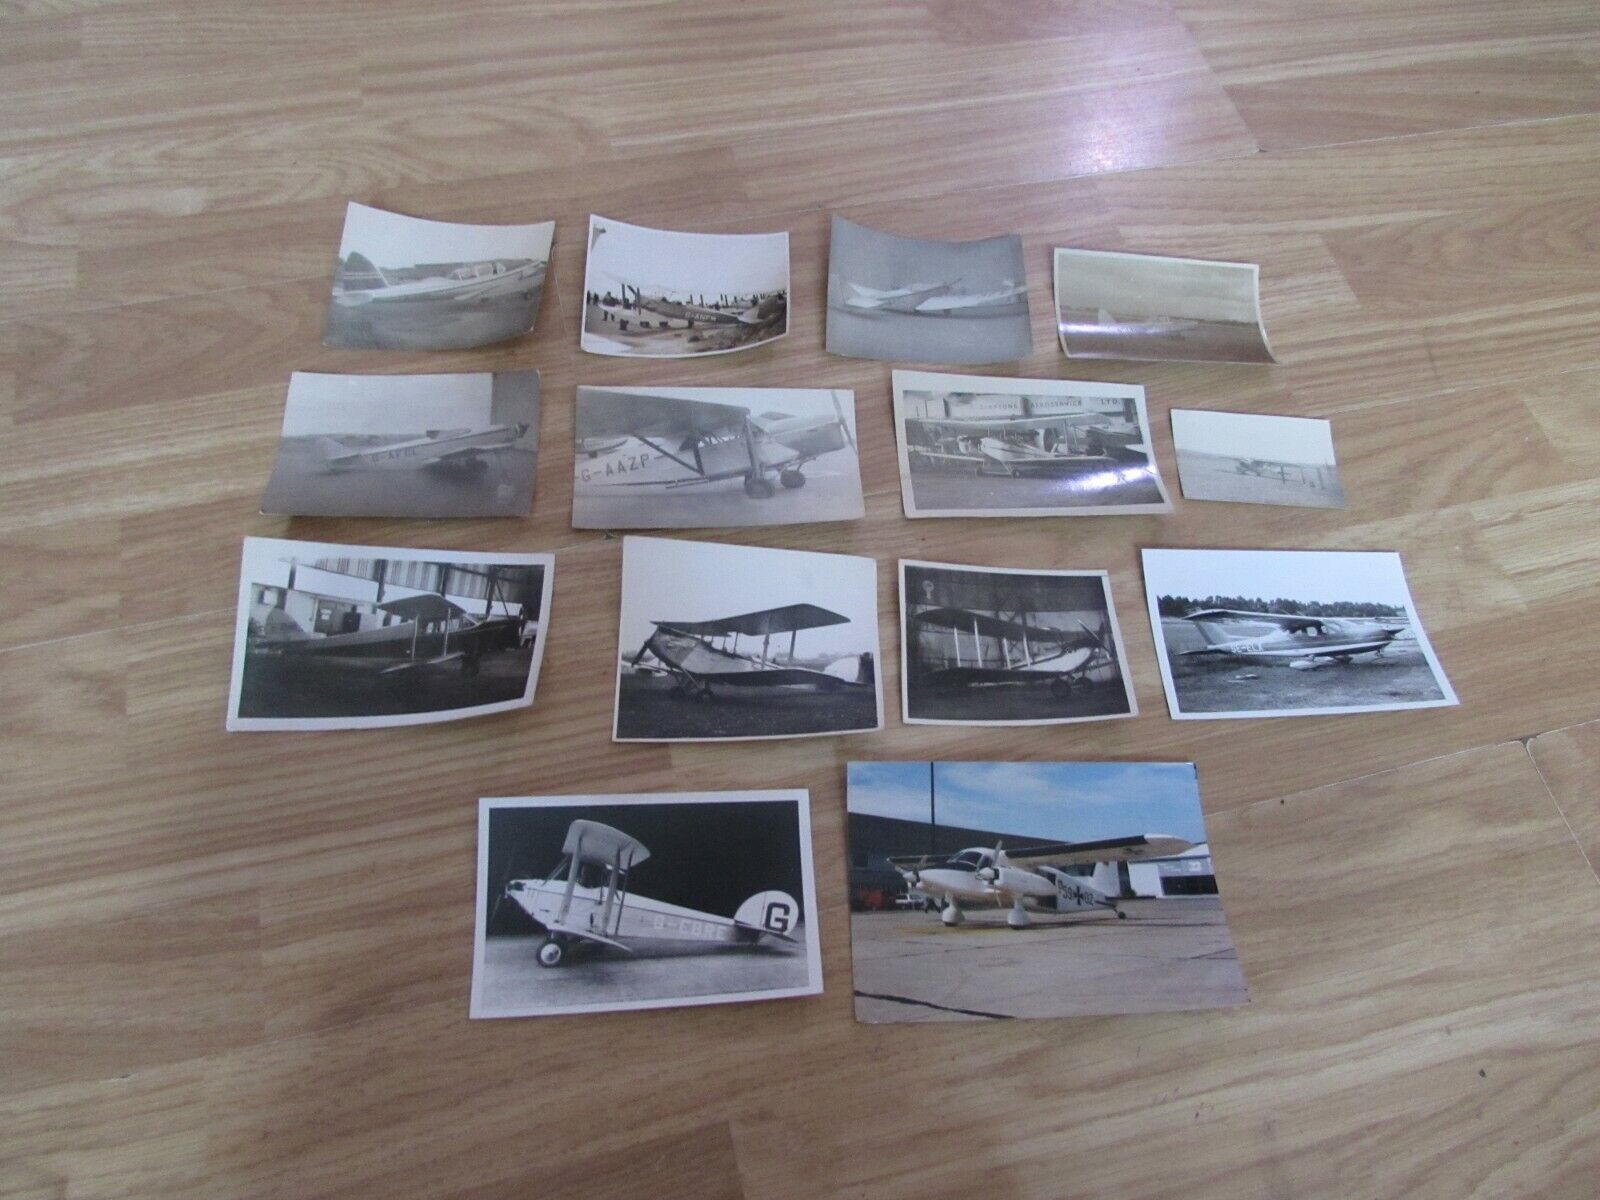 14 ASSORTED VINTAGE PHOTOGRAHS OF AEROPLANES VARIOUS PLANES